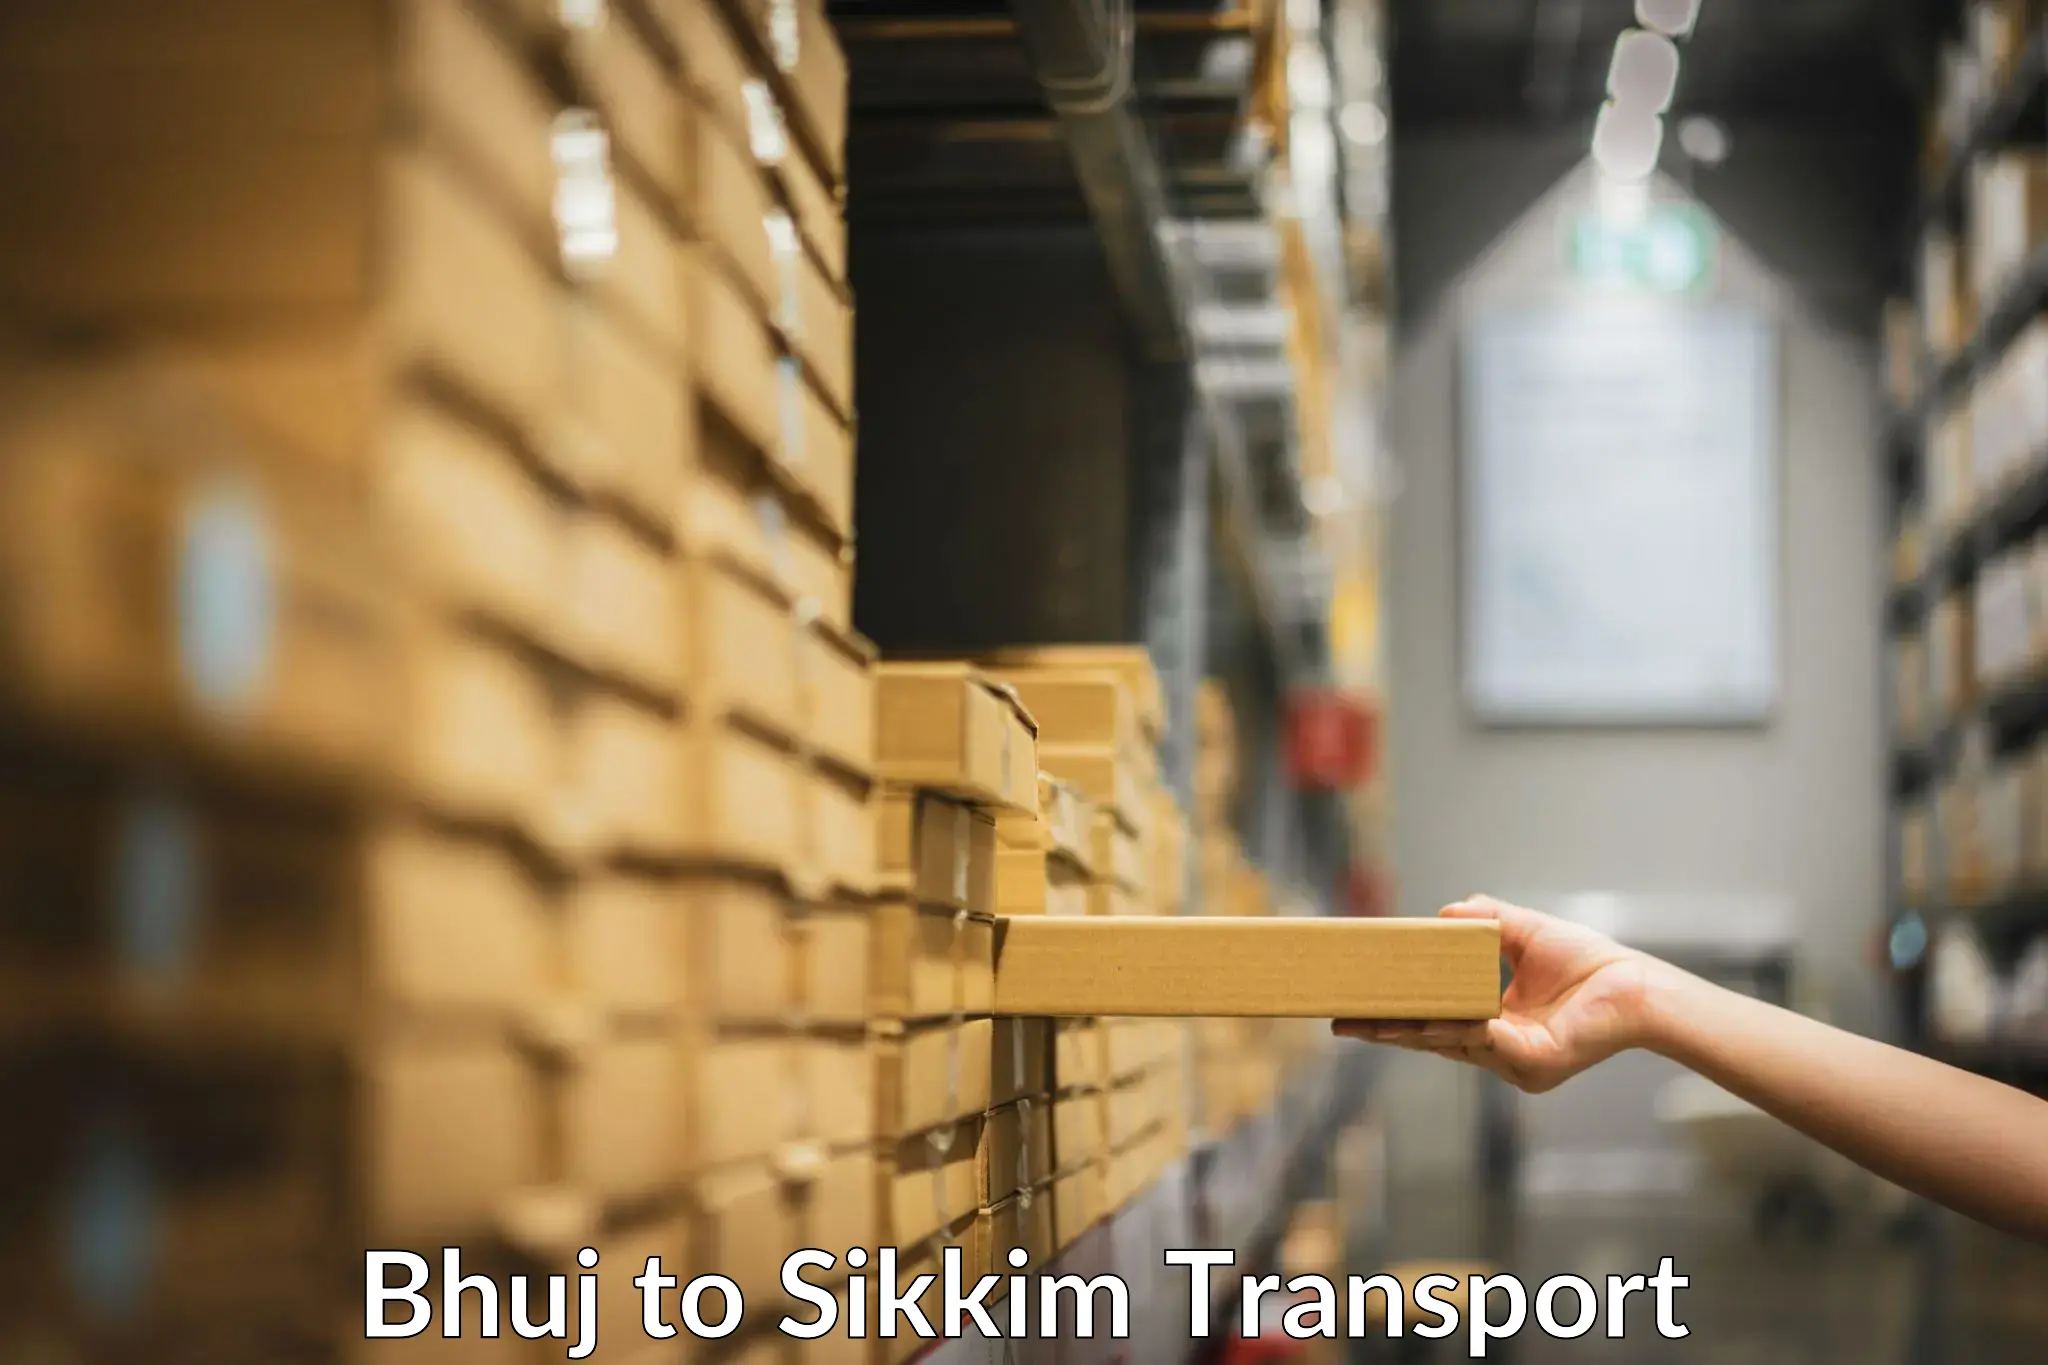 Shipping partner Bhuj to South Sikkim